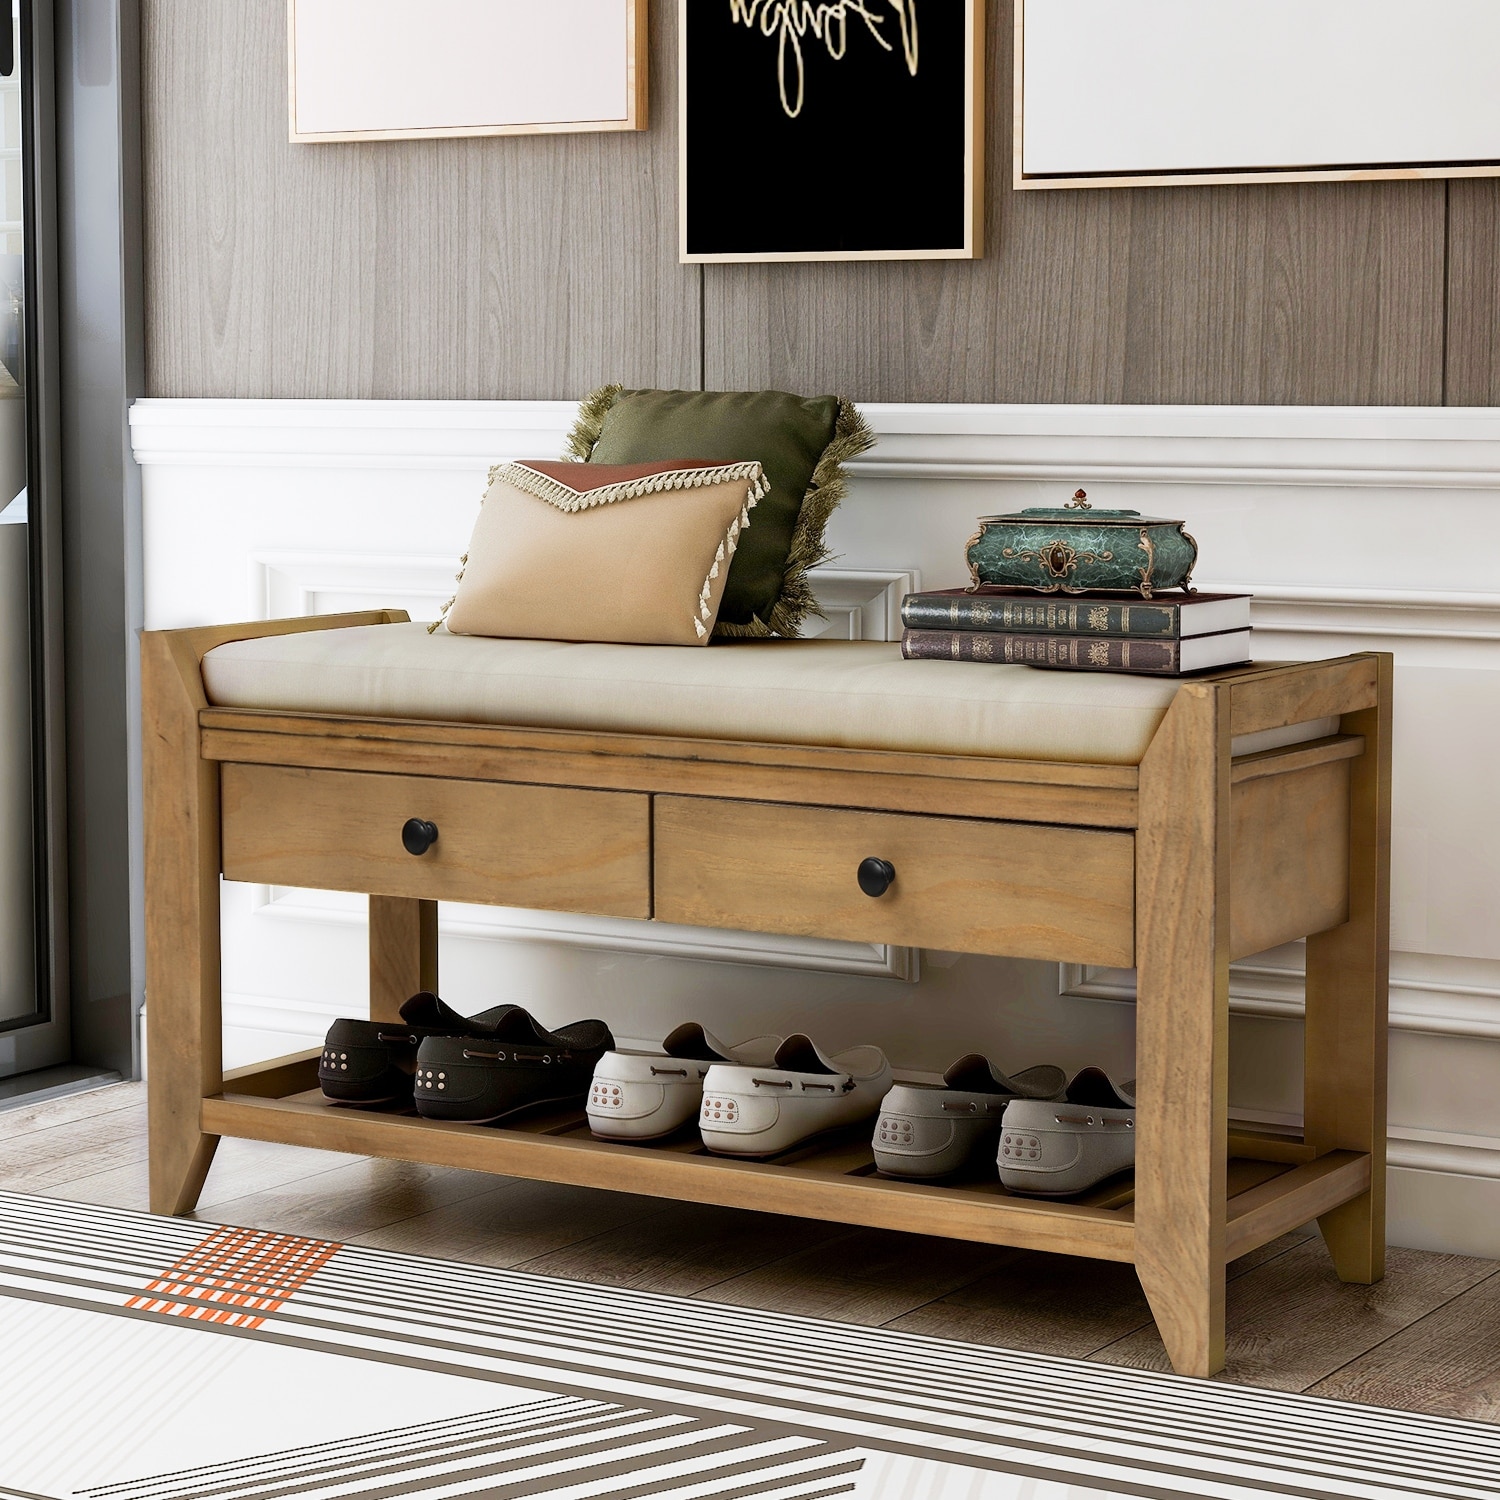 https://ak1.ostkcdn.com/images/products/is/images/direct/7434cb33d9a234fb6d8b5cc5eaf4954f6a03ace4/Home-Shoe-Rack-Entryway-Storage-Bench-with-Cushion-%26-Drawers%2C-Old-Pine.jpg